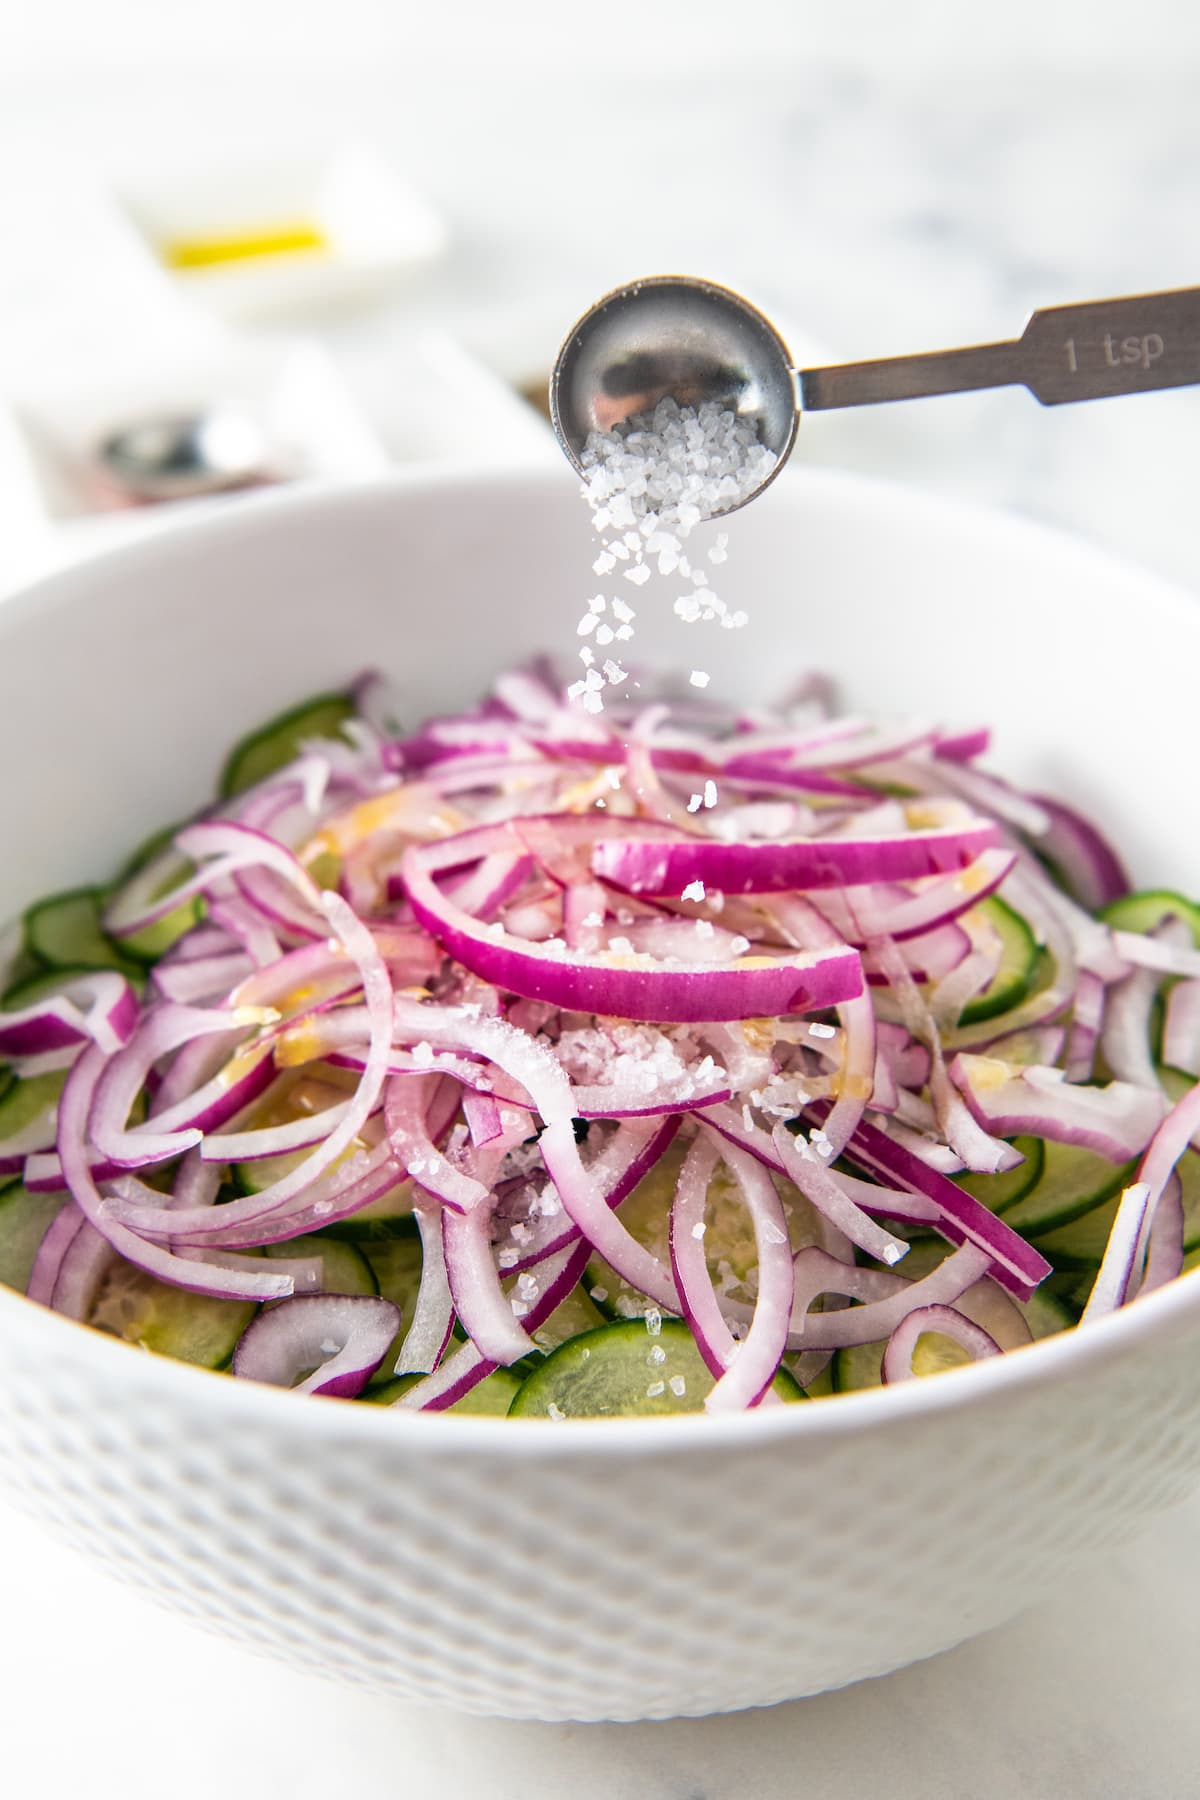 Salt being added to a bowl filled with cucumbers, red onions and olive oil.